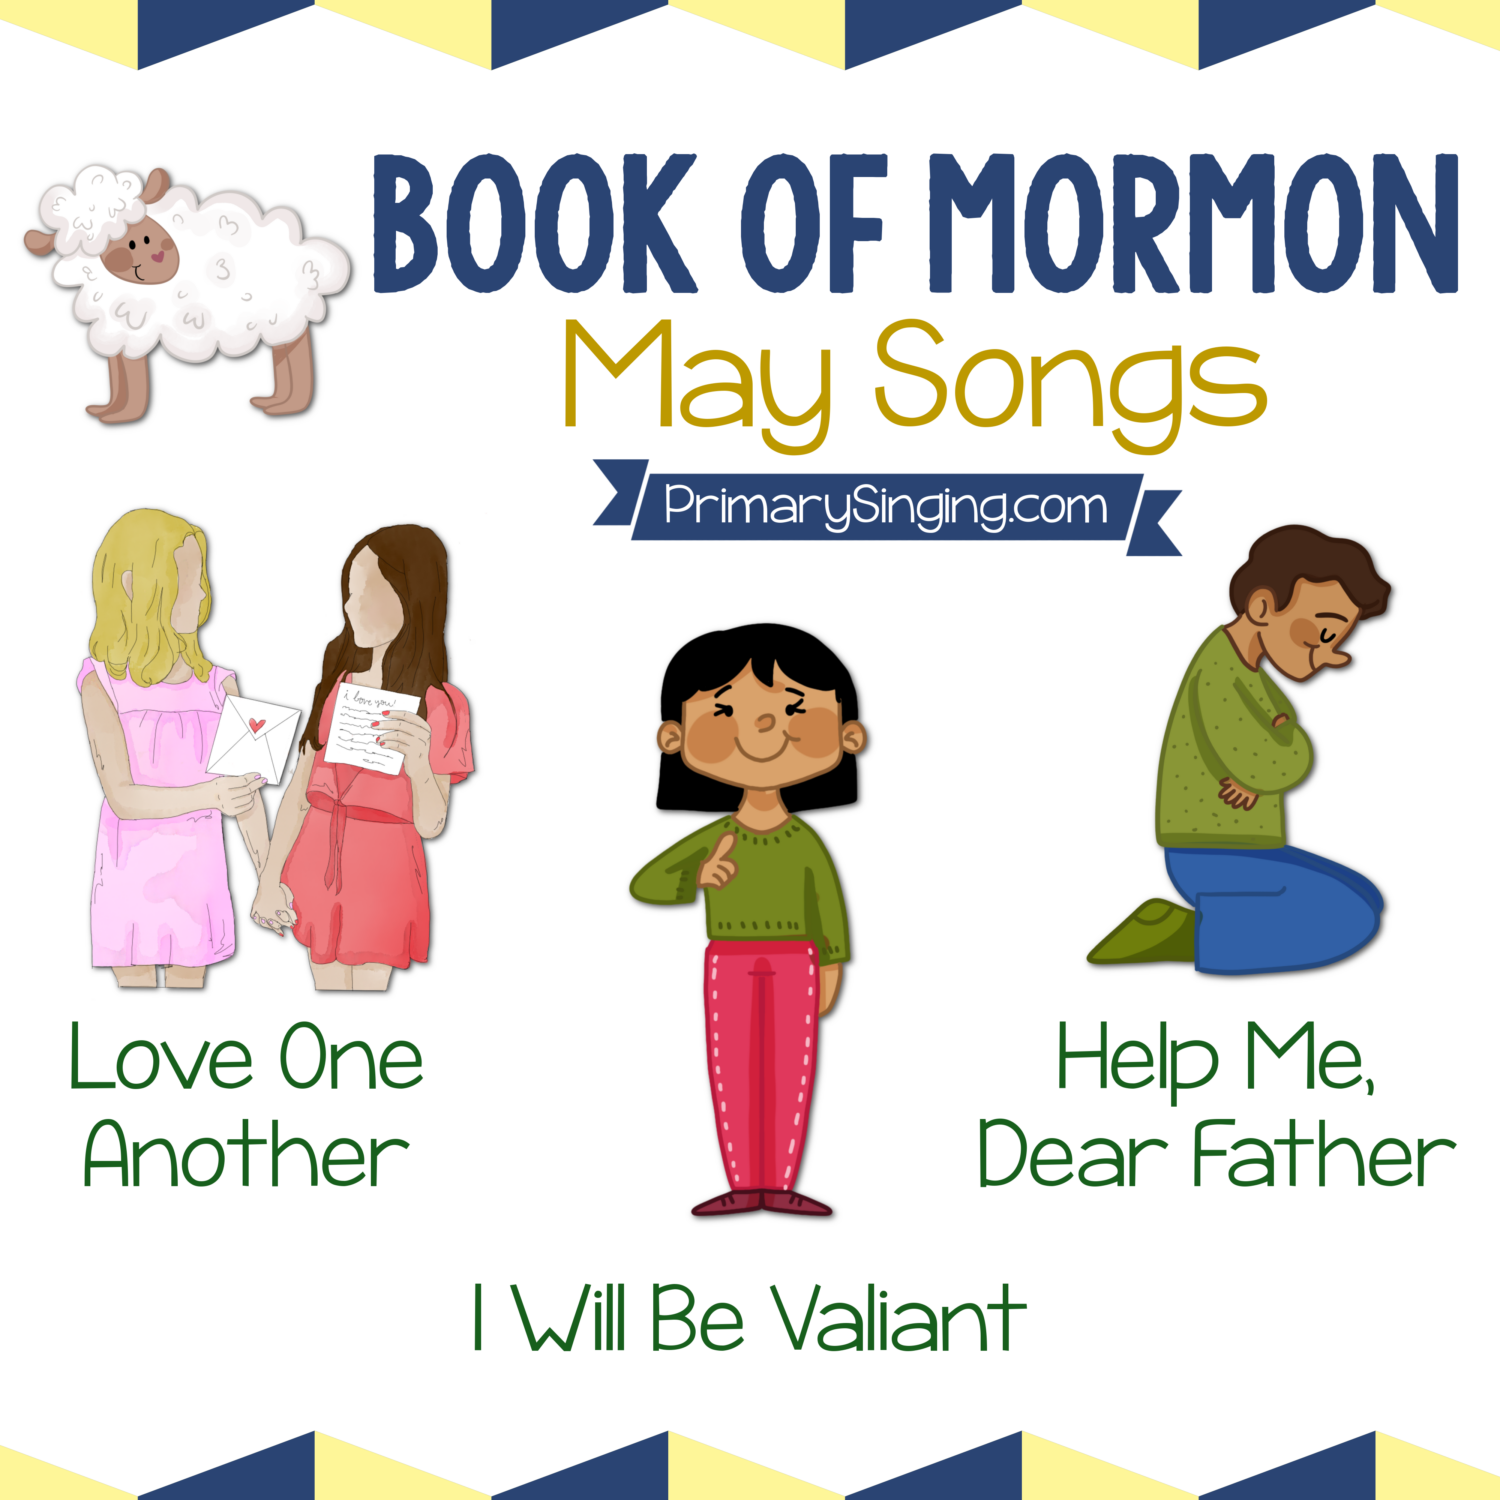 Book of Mormon May Song List - Love One Another, I Will Be Valiant, and Help Me Dear Father. Teach these 3 great Primary songs during Singing Time or home Come Follow Me lessons.